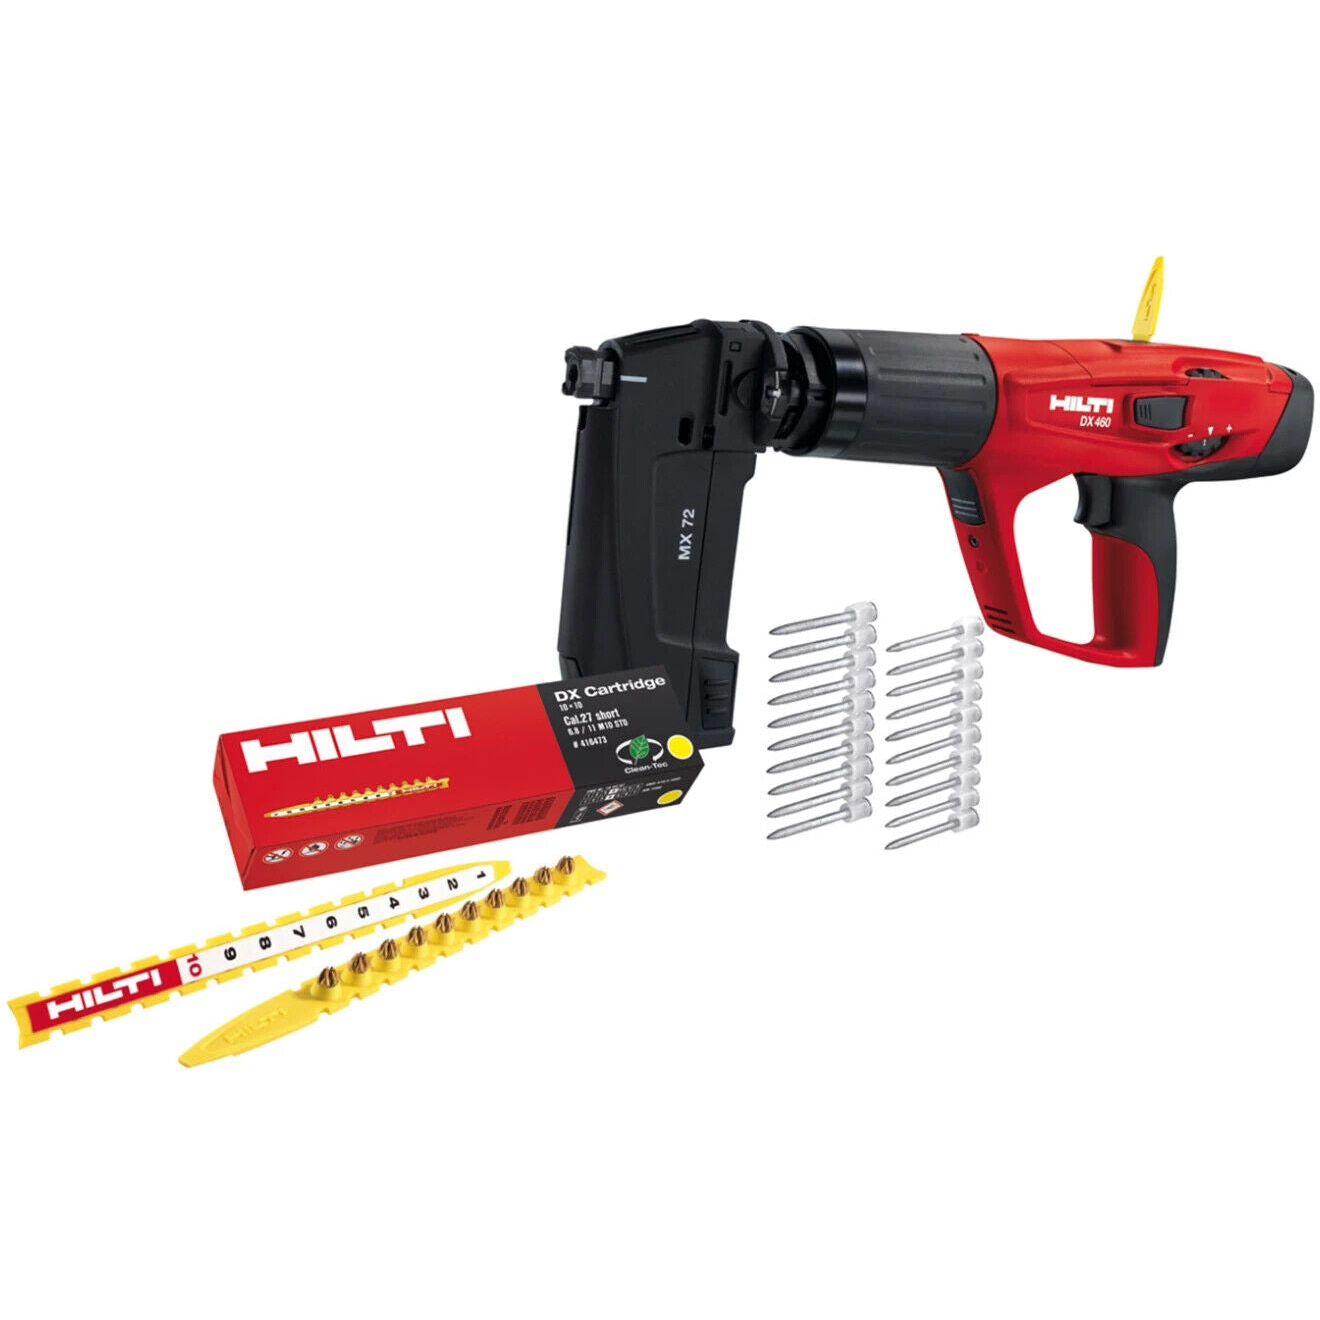 Hilti Nail Gun DX 460 492885 72mm - Fully Automatic Nail Gun for Concrete & Steel (Used)